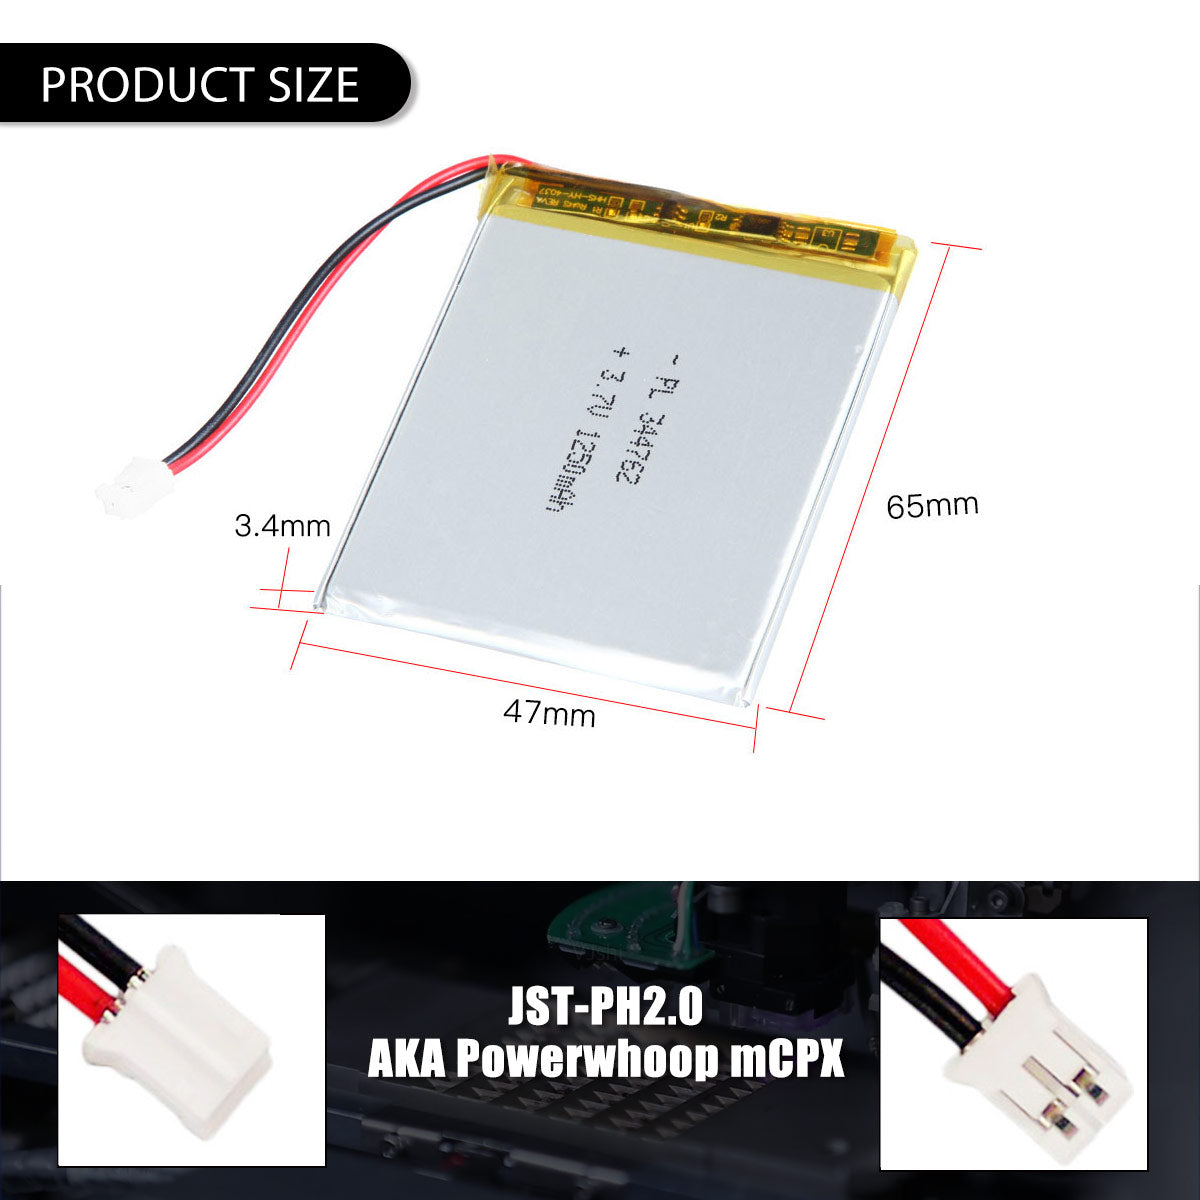 3.7V 1250mAh 344762 Rechargeable Lithium Polymer Battery